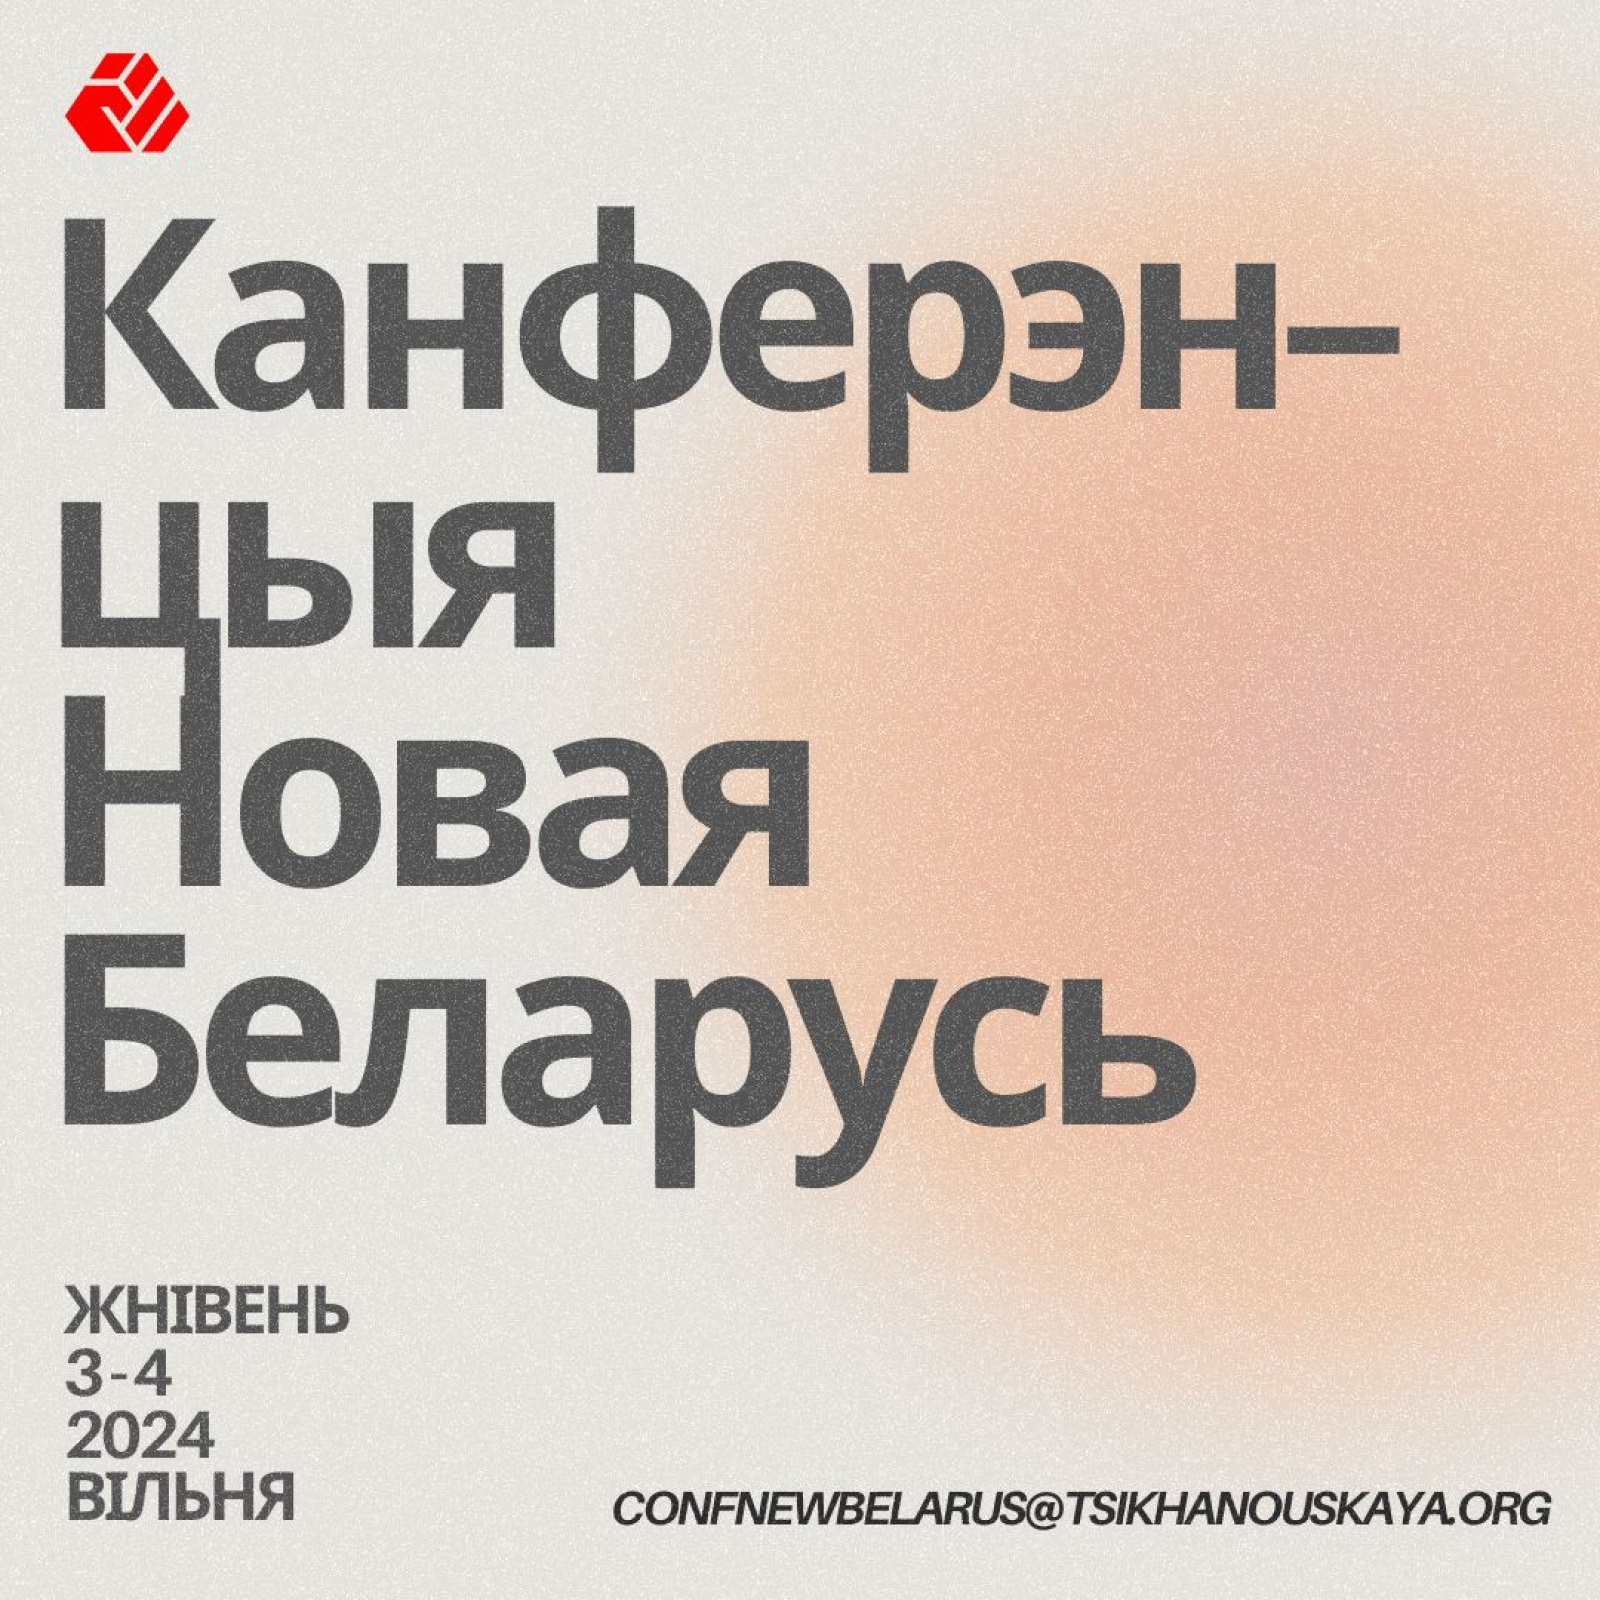 The registration for participation in the "New Belarus" conference continues